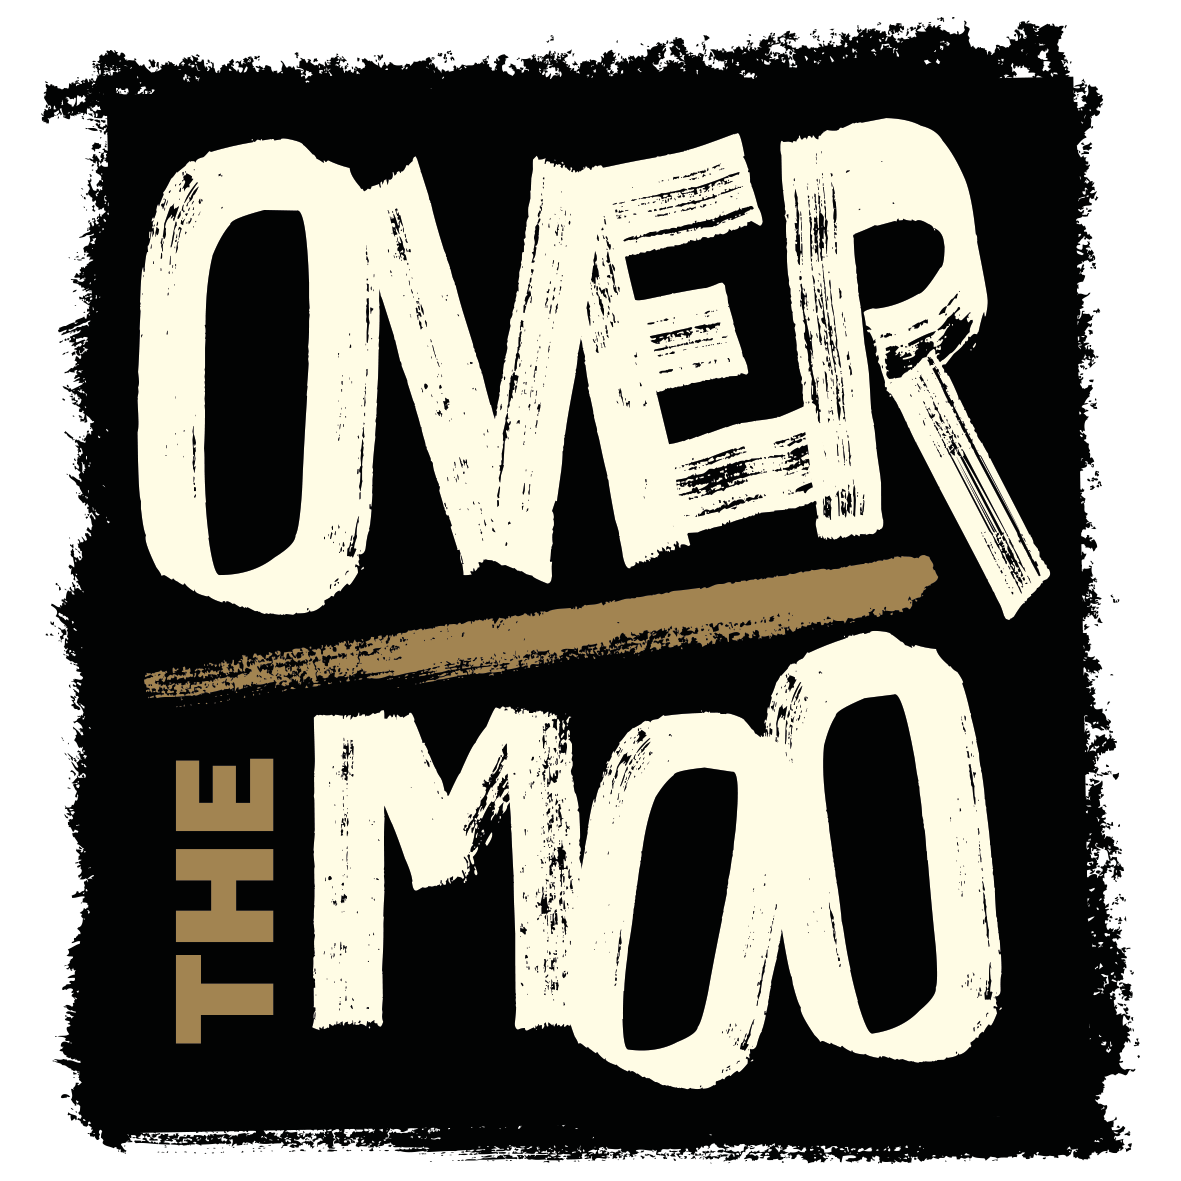 Over the moo